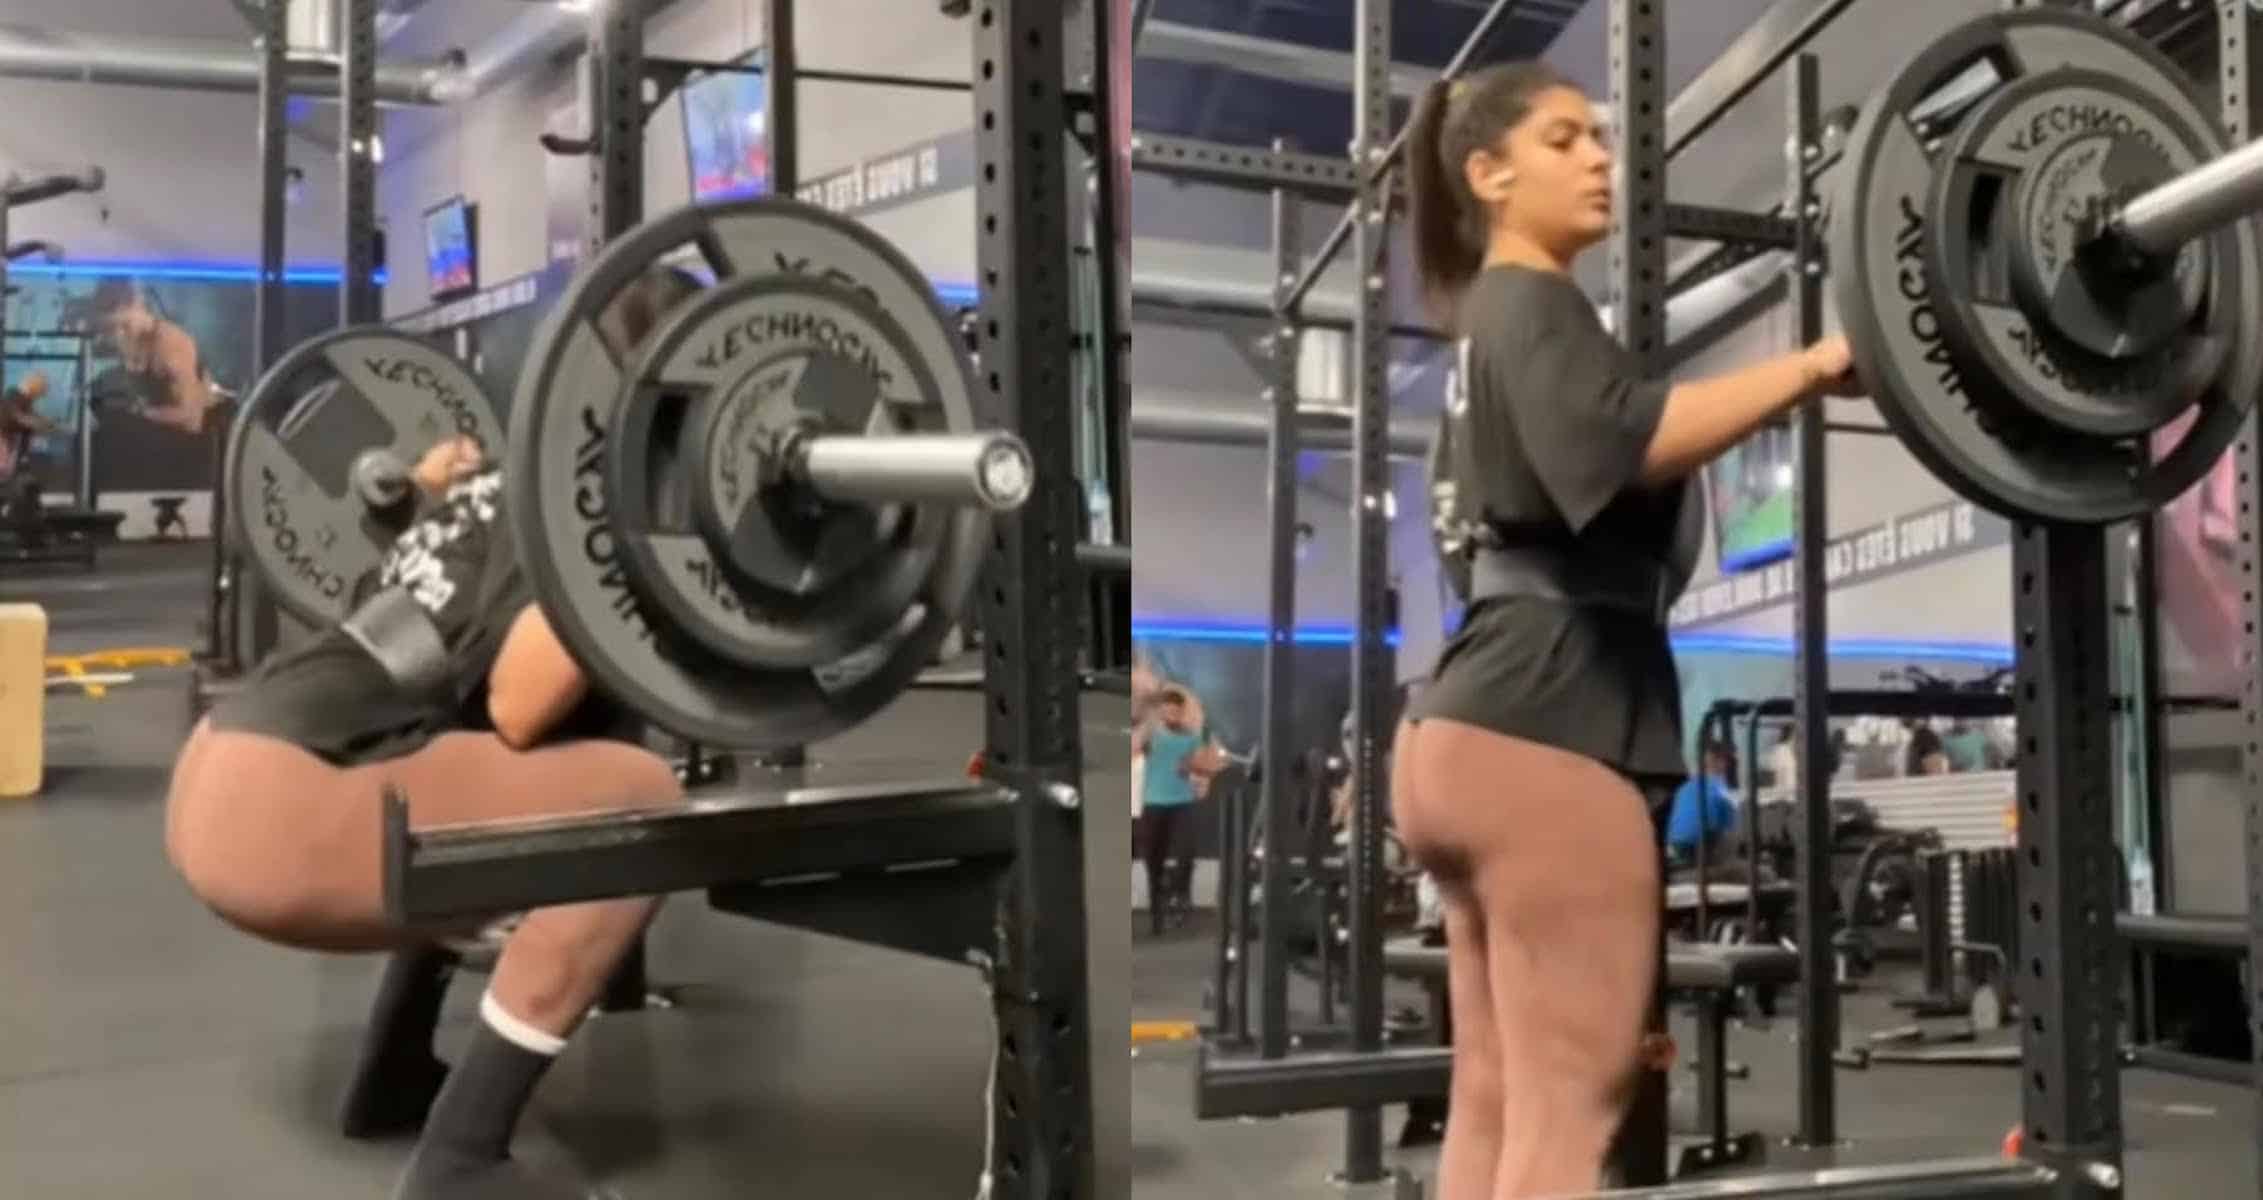 Female TikToker Goes Viral For Wearing Skin Colored Leggings In The Gym  That Left Everyone Confused - Generation Iron Fitness & Strength Sports  Network